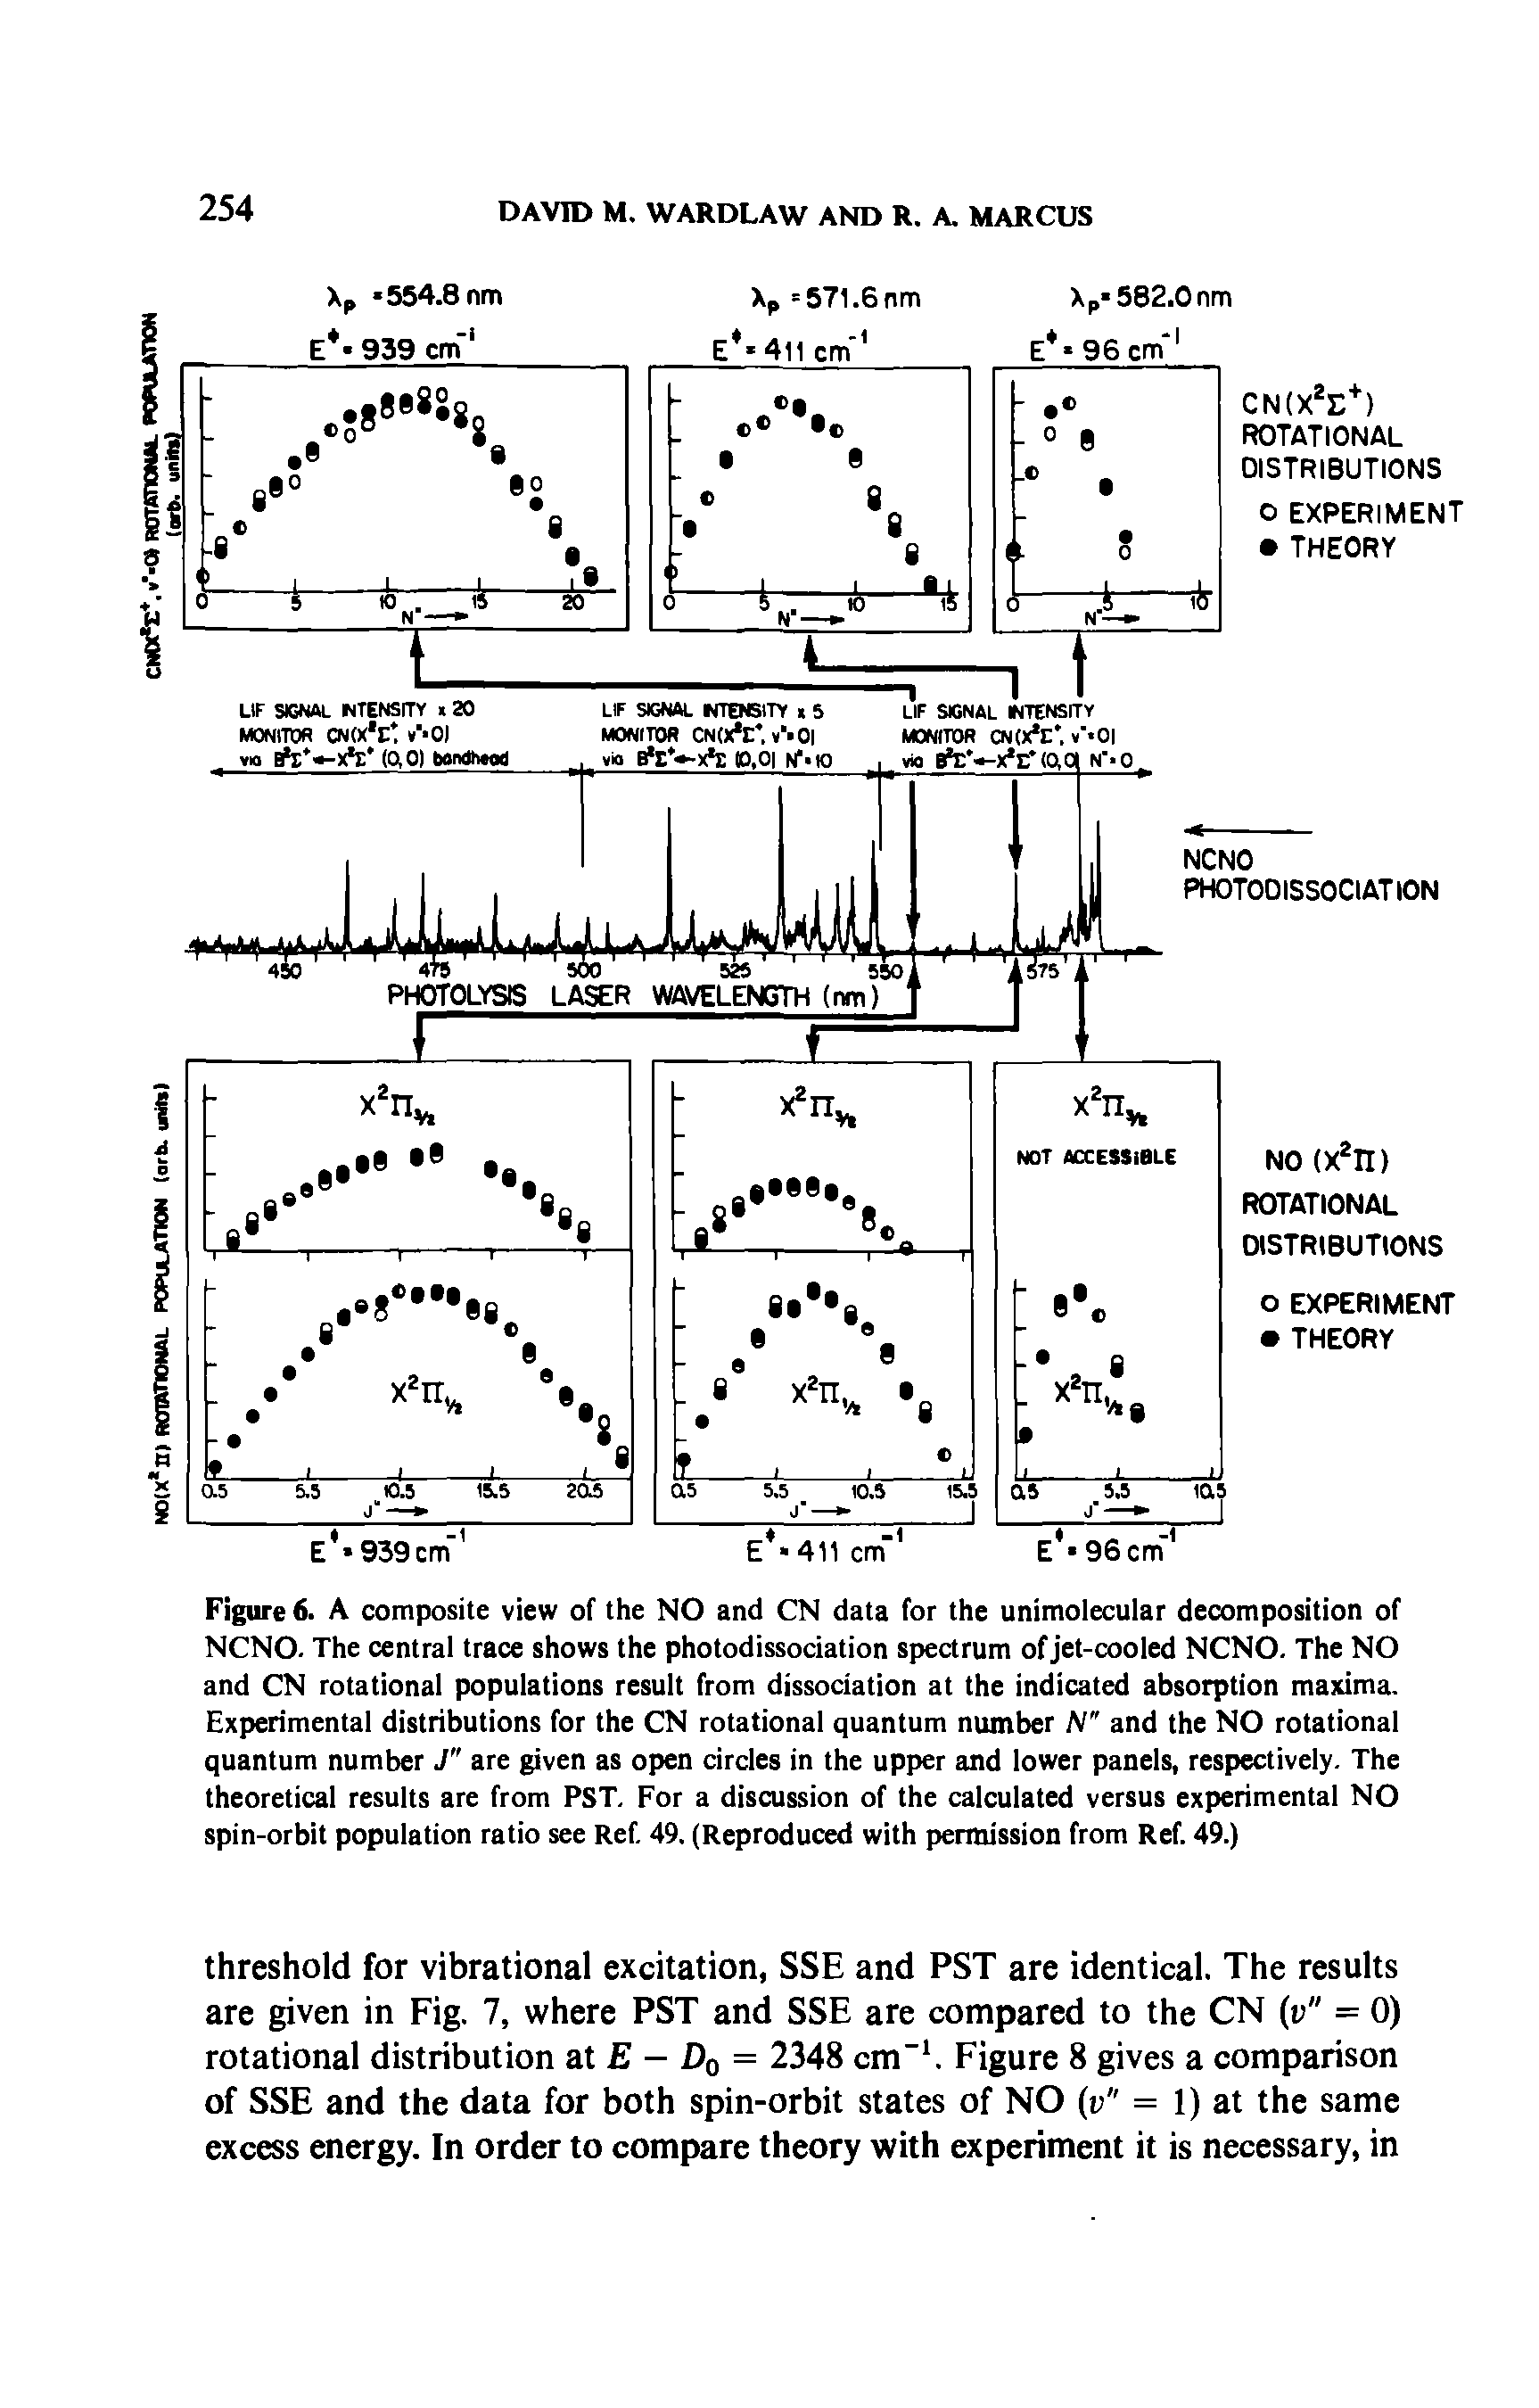 Figure 6. A composite view of the NO and CN data for the unimolecular decomposition of NCNO. The central trace shows the photodissociation spectrum of jet-cooled NCNO. The NO and CN rotational populations result from dissociation at the indicated absorption maxima. Experimental distributions for the CN rotational quantum number N" and the NO rotational quantum number J" are given as open circles in the upper and lower panels, respectively. The theoretical results are from PST. For a discussion of the calculated versus experimental NO spin-orbit population ratio see Ref. 49. (Reproduced with permission from Ref. 49.)...